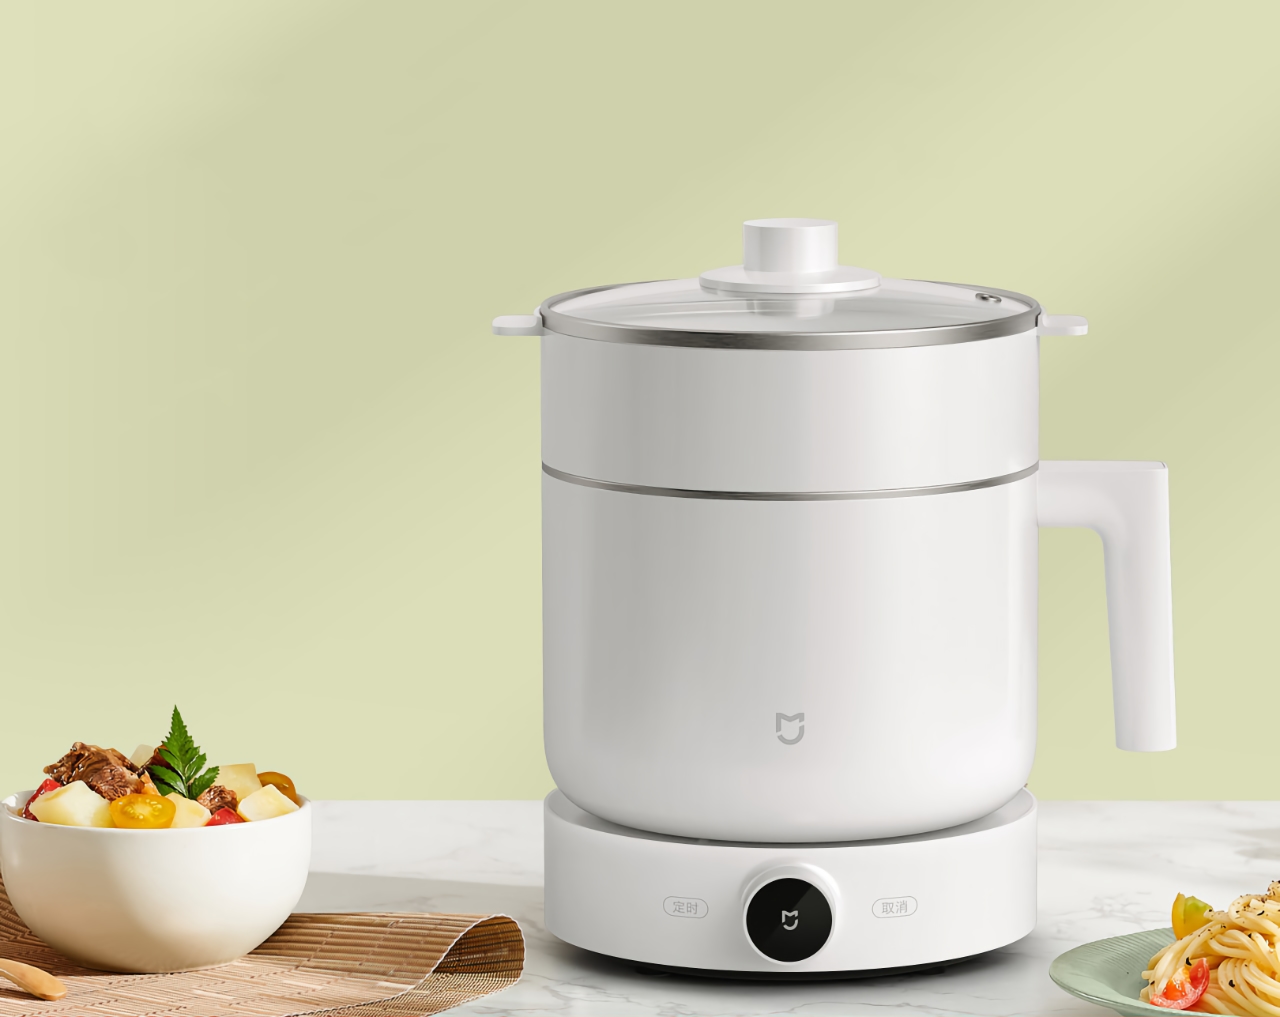 Xiaomi introduced MiJia Smart Multi-function Cooking Pot 1.5L: smart multicooker for $26